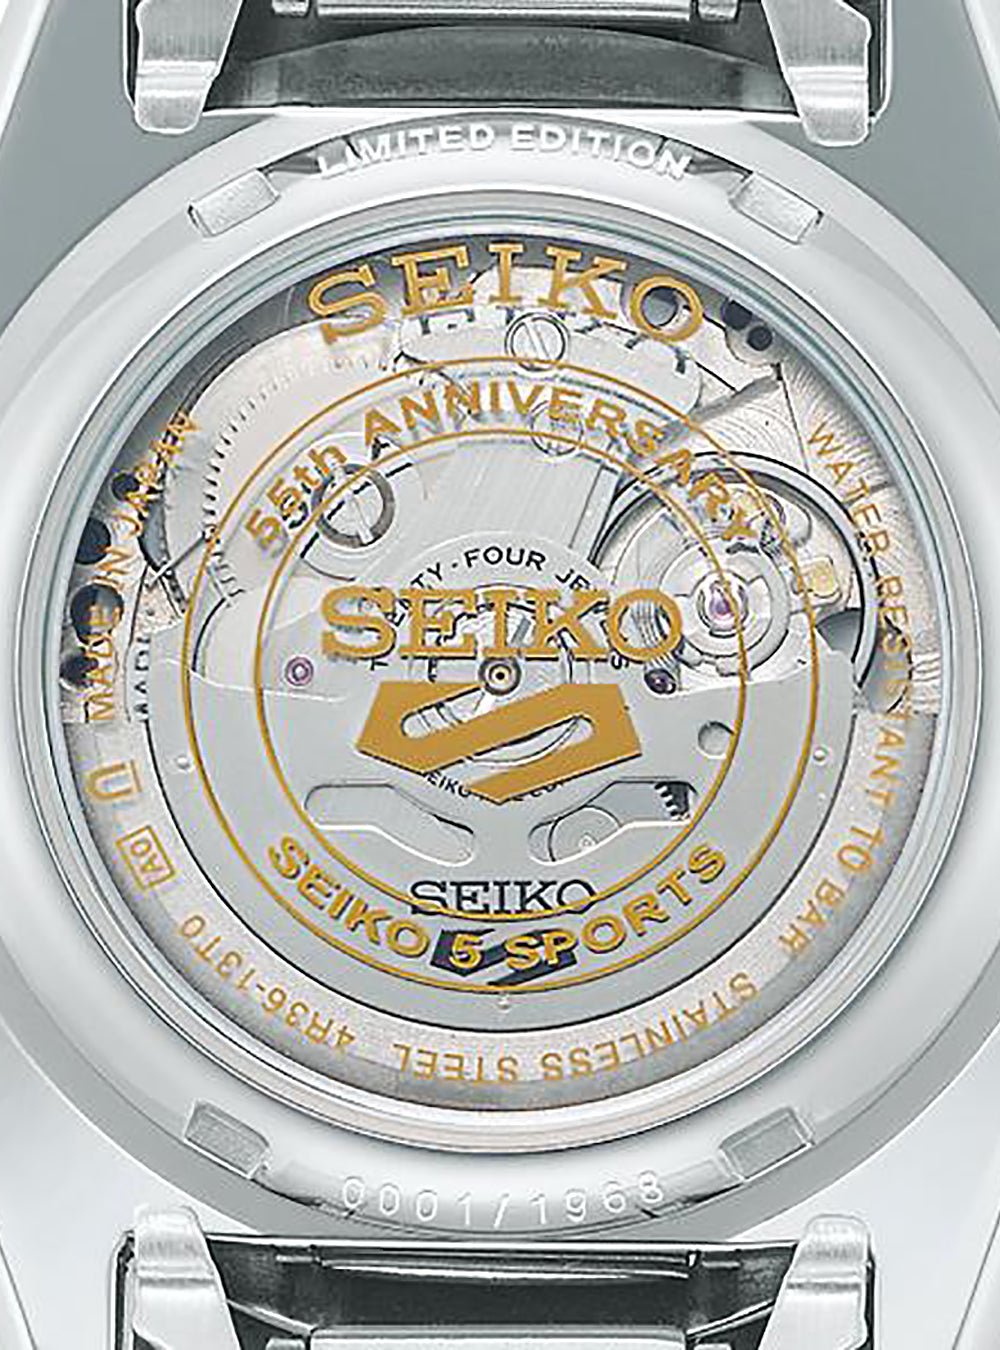 SEIKO 5 SPORTS SKX SPORTS STYLE 55TH ANNIVERSARY CUSTOMIZE CAMPAIGN LIMITED EDITION SBSA213 MADE IN JAPAN JDMWRISTWATCHjapan-select